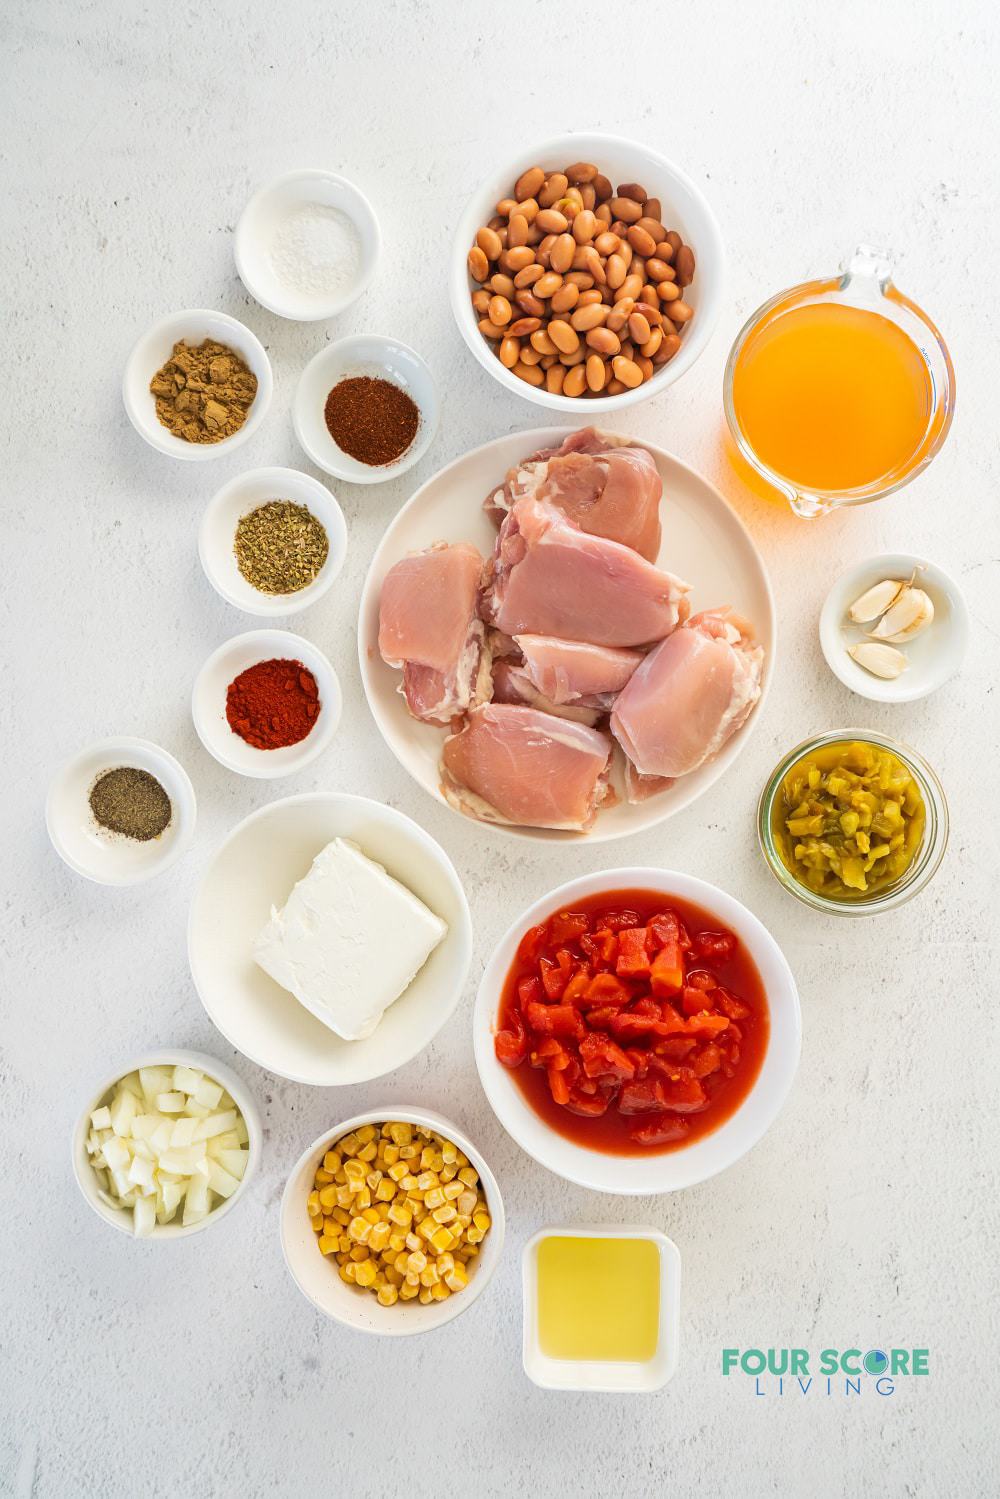 The ingredients for making white chicken chili in separate bowls on a countertop, viewed from above.